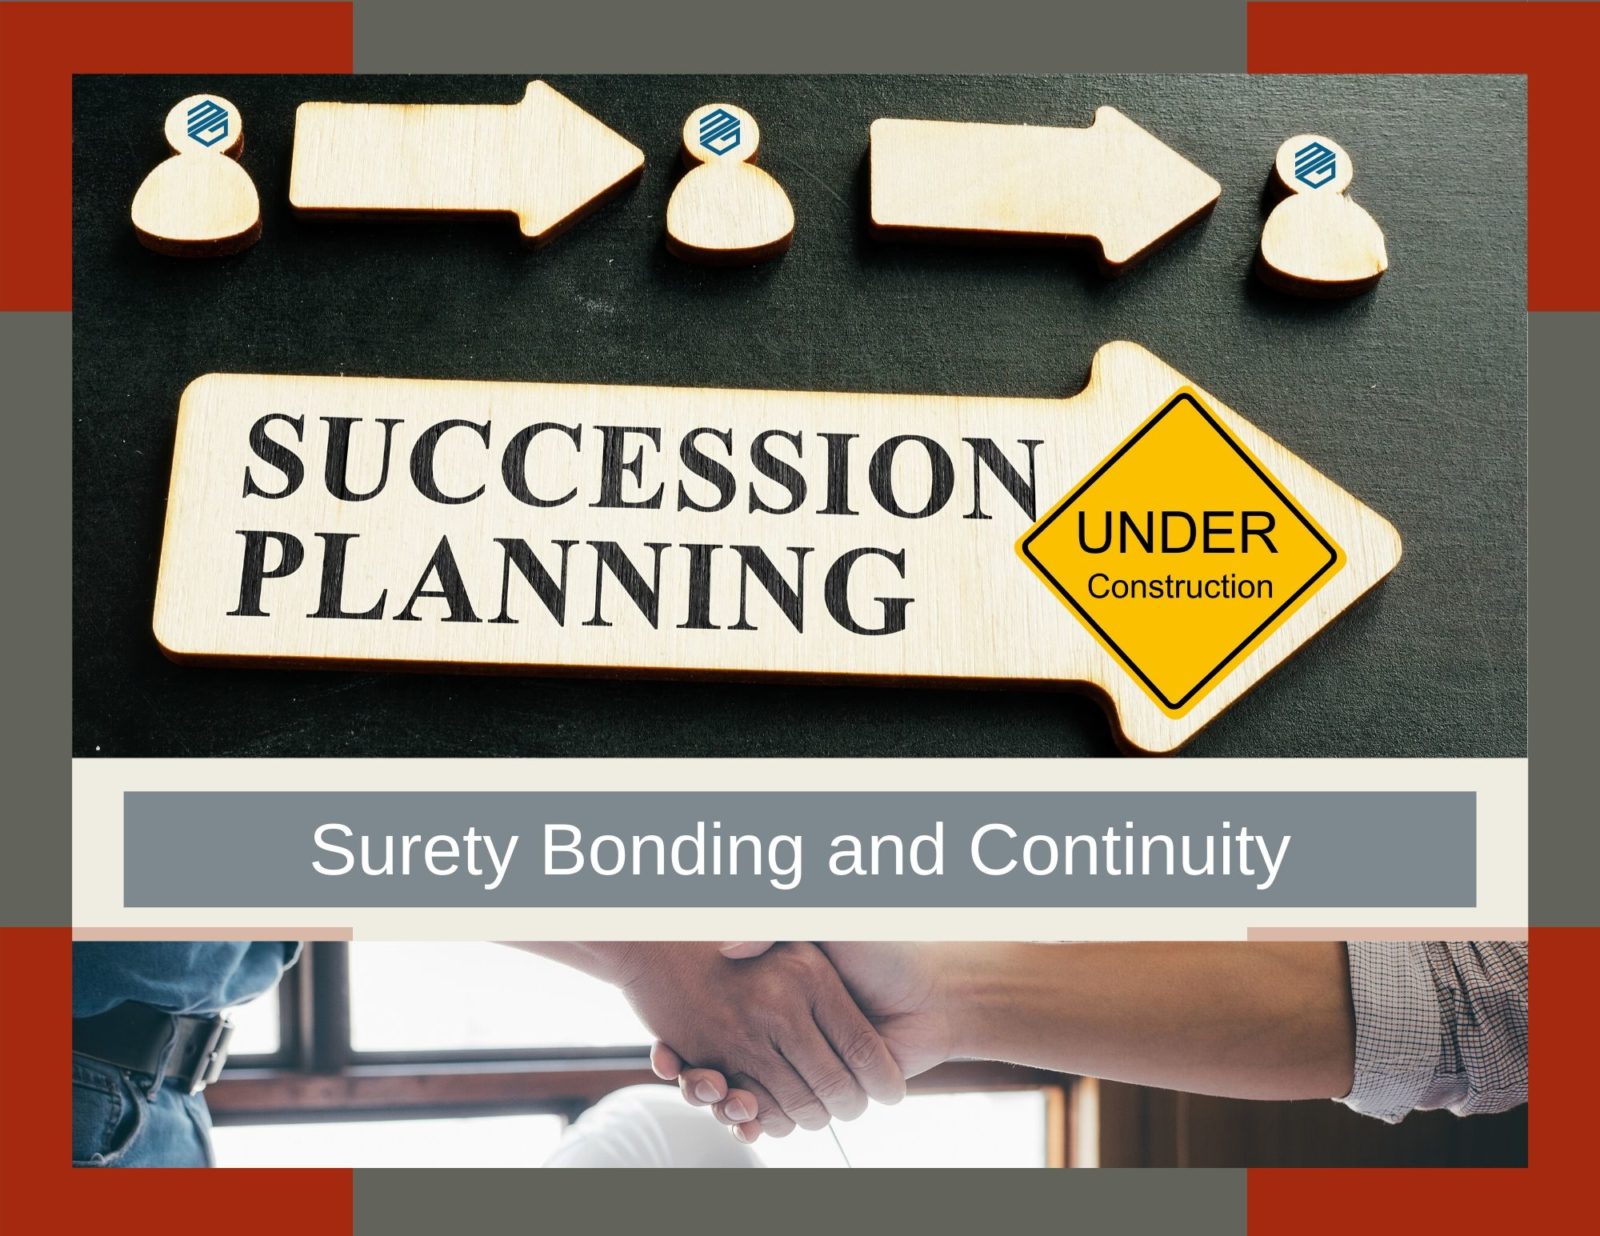 Surety Bonding, Continuity and Succession Planning - Picture of an arrow that says, "succession planning". At the end is an "under construction " sign. Below is a picture of two contractors shaking hands. The words, "Surety Bonding and Continuity" in a tex box. Red and gray border